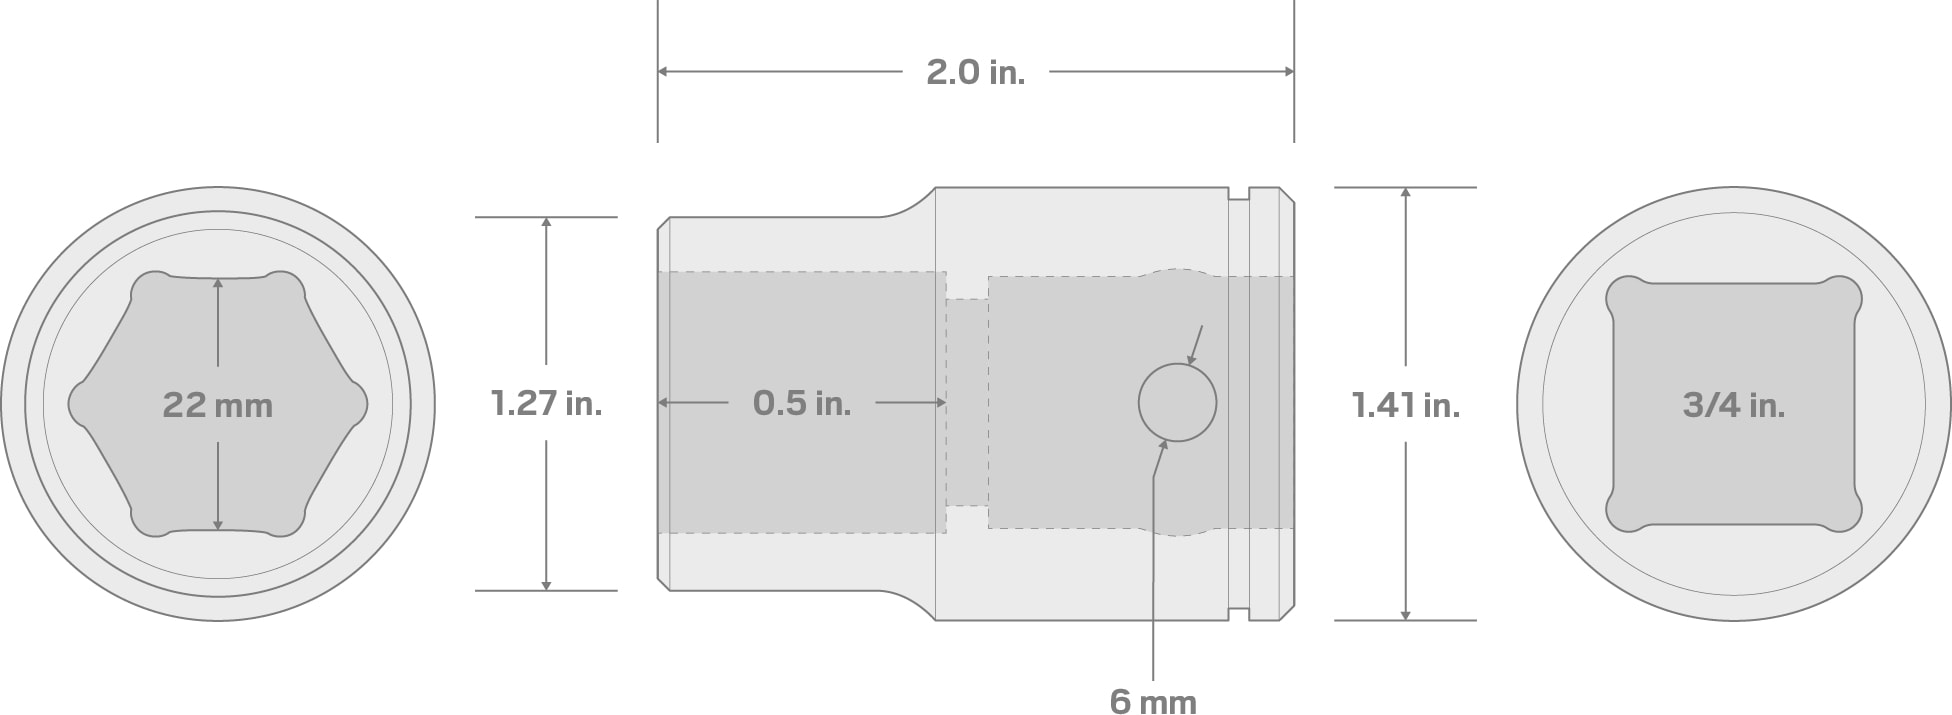 Specs for 3/4 Inch Drive x 22 mm 6-Point Socket